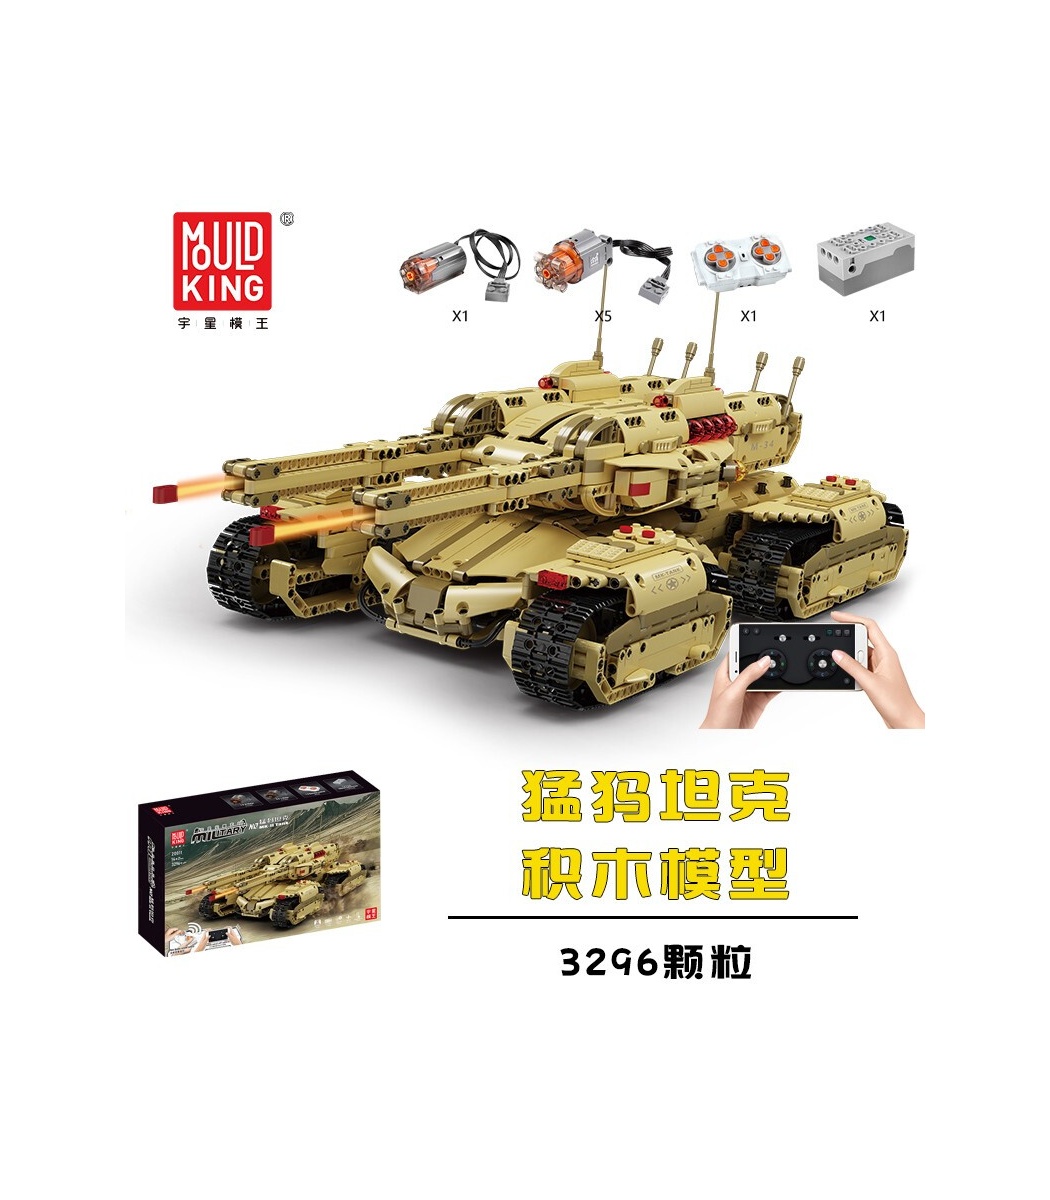 Mould King 20011 Technology Tank Model Building Blocks, 3296 Pieces  Technology Building Kit for Adults and Kids, Remote Controlled Tank with  Remote